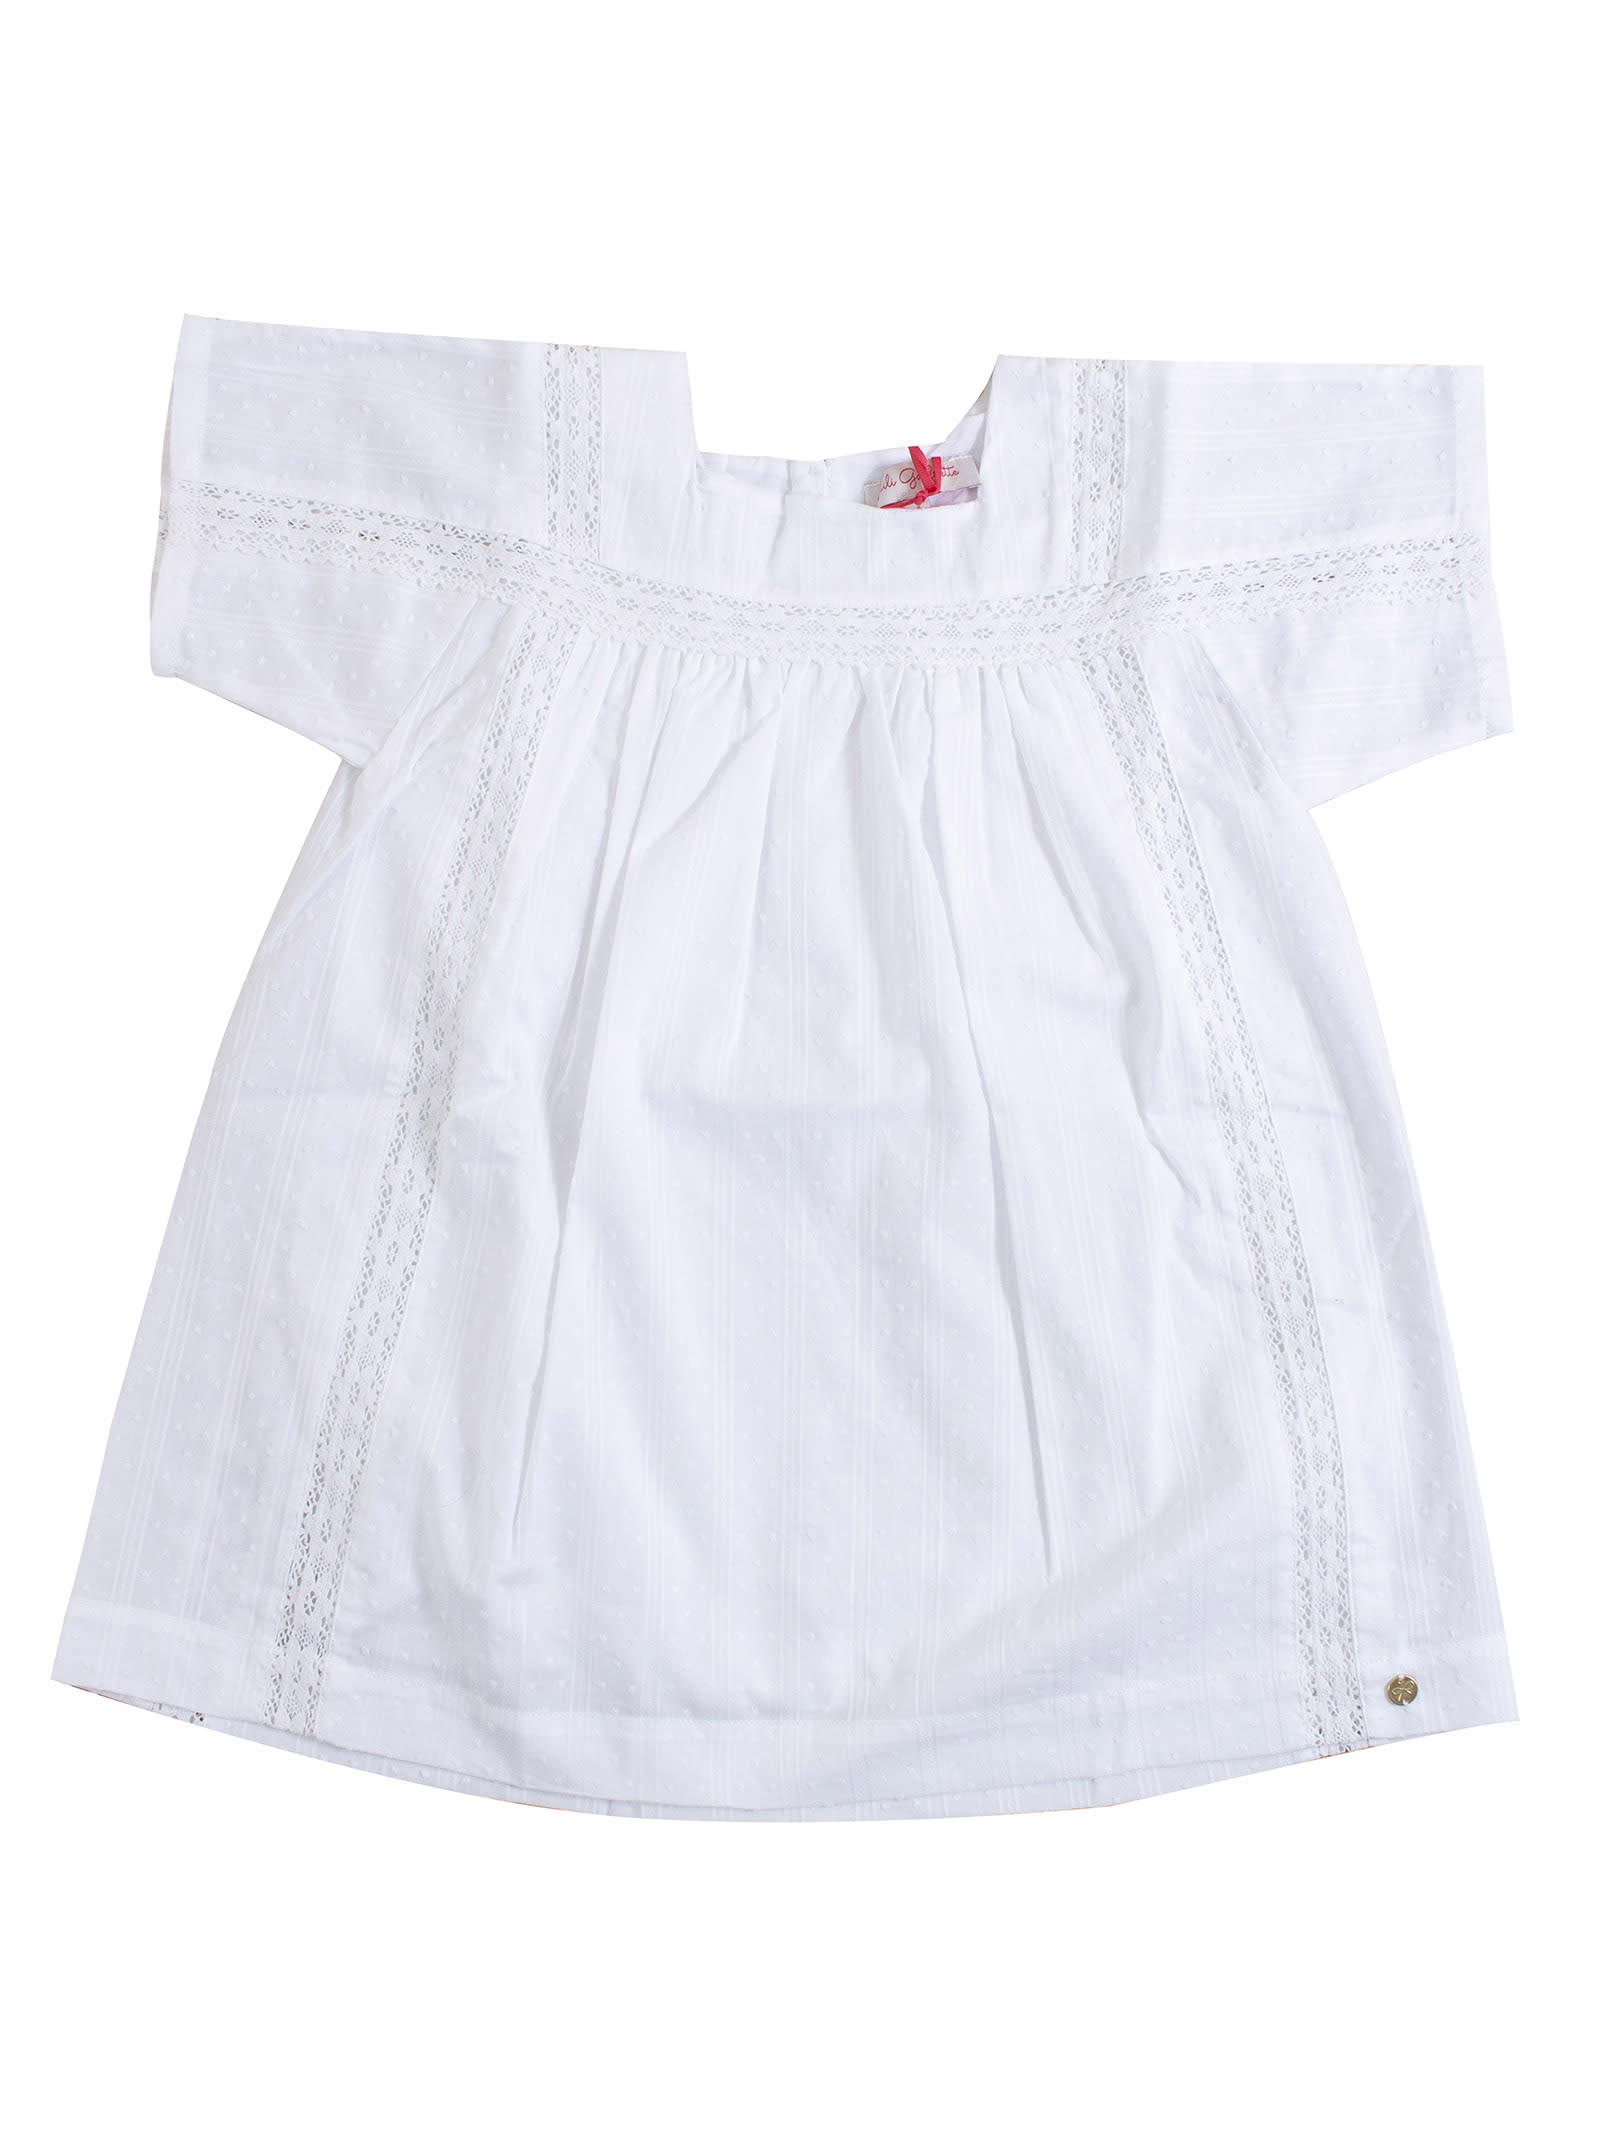 Lili Gaufrette Little Girl Dress With Embroidery